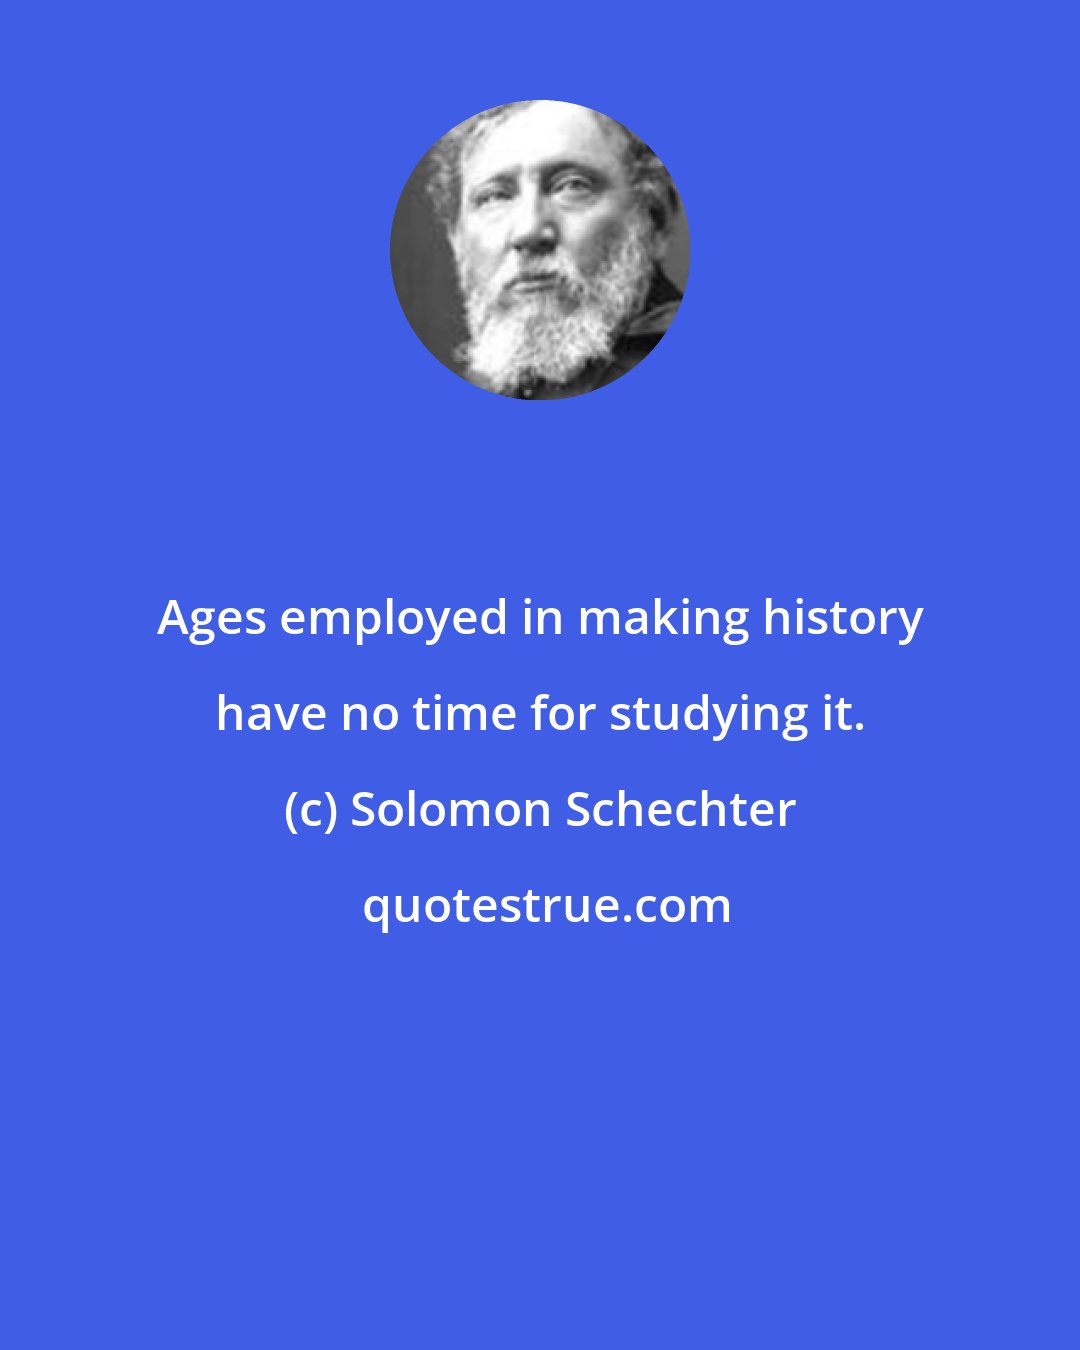 Solomon Schechter: Ages employed in making history have no time for studying it.